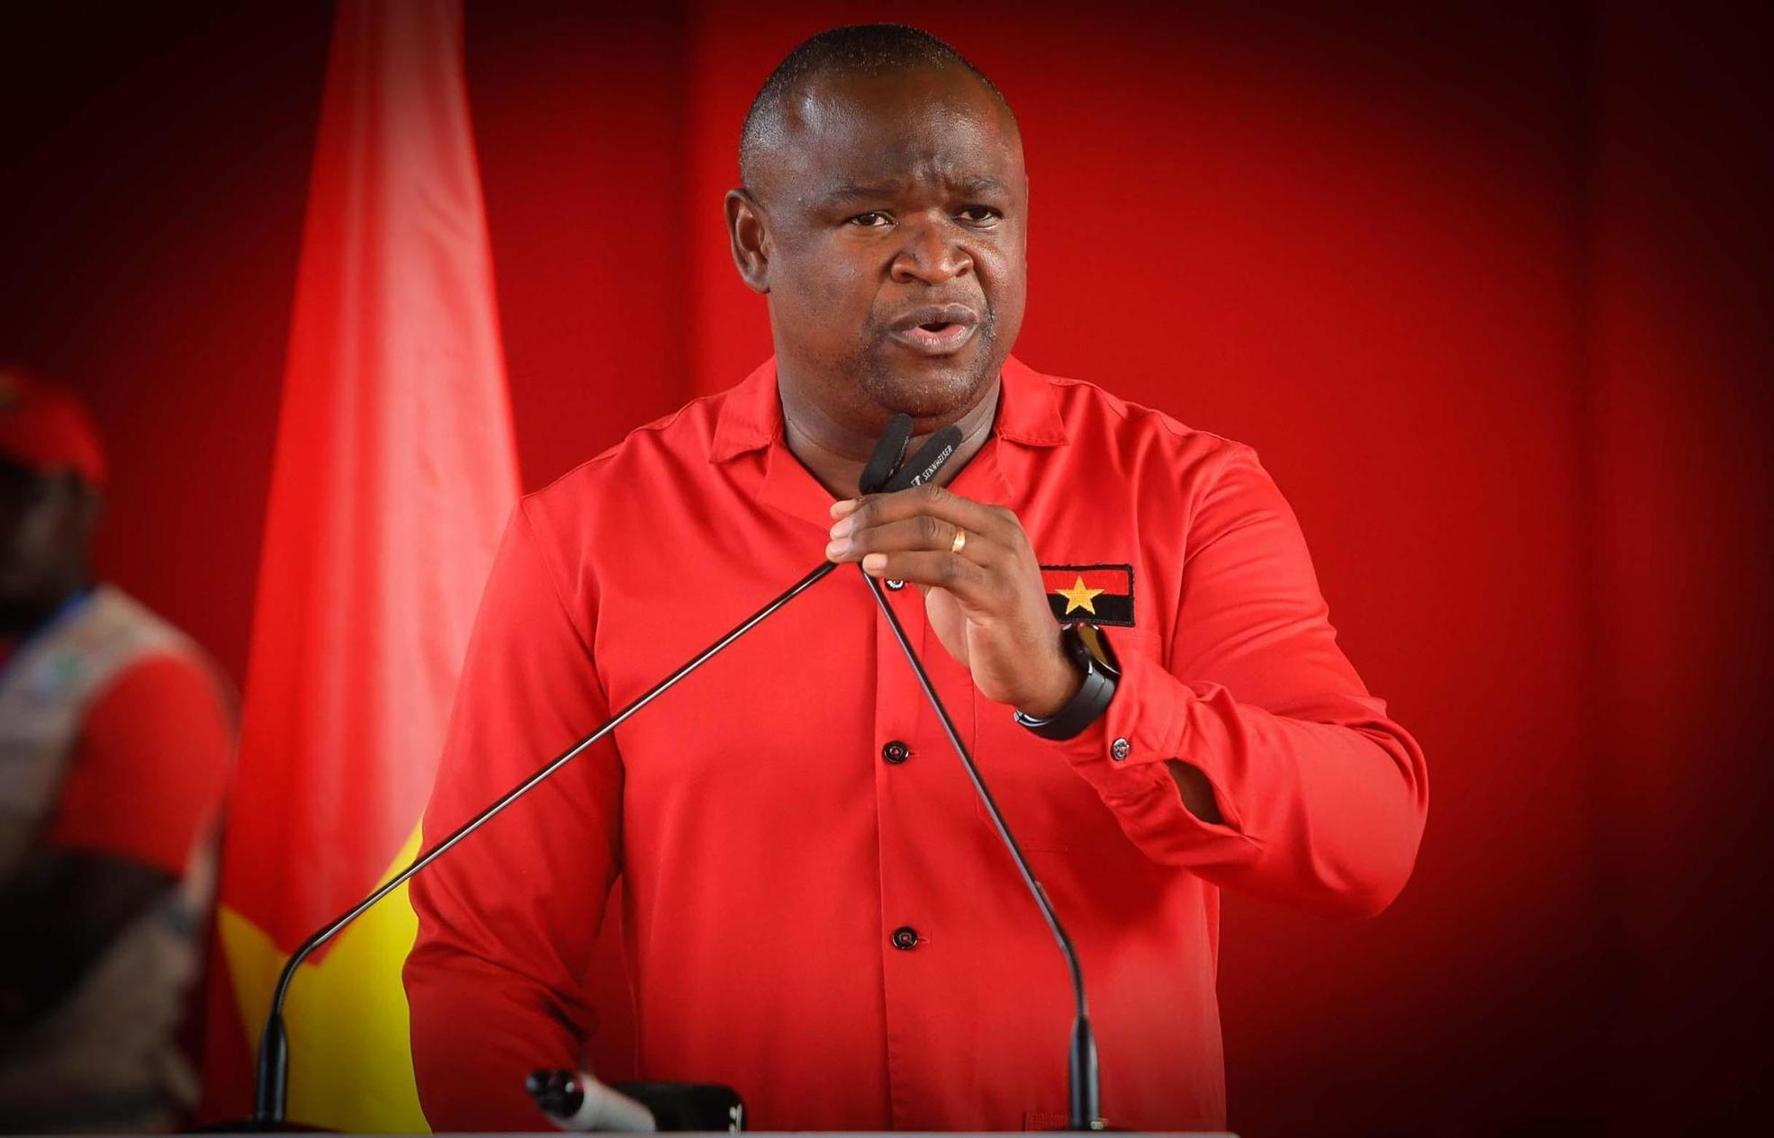 MPLA in Luanda wants greater strengthening of base structures